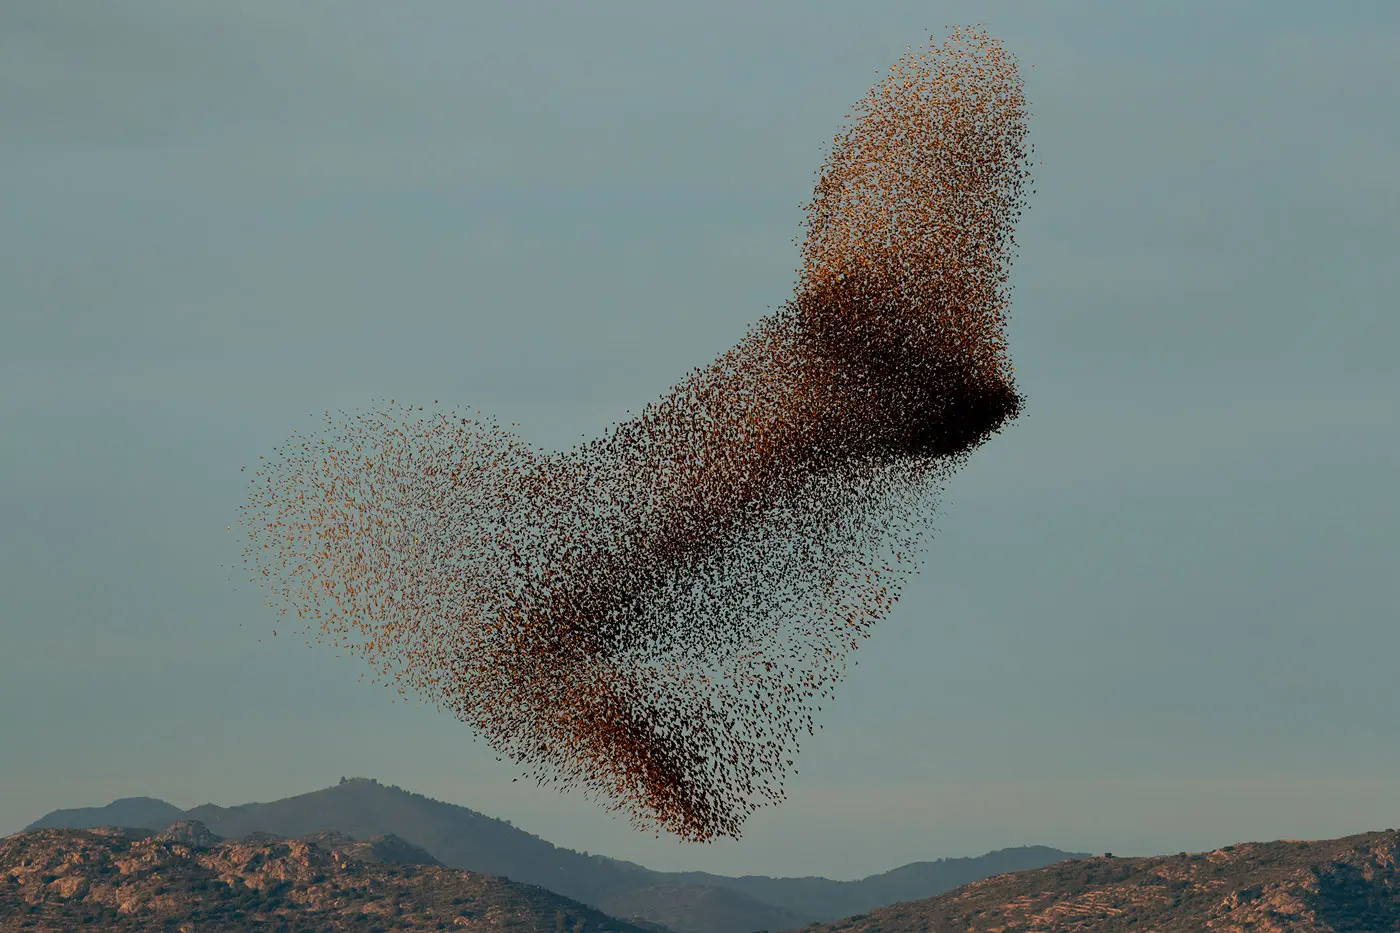 starling murmuration and mountains photographed by Søren Solkær.